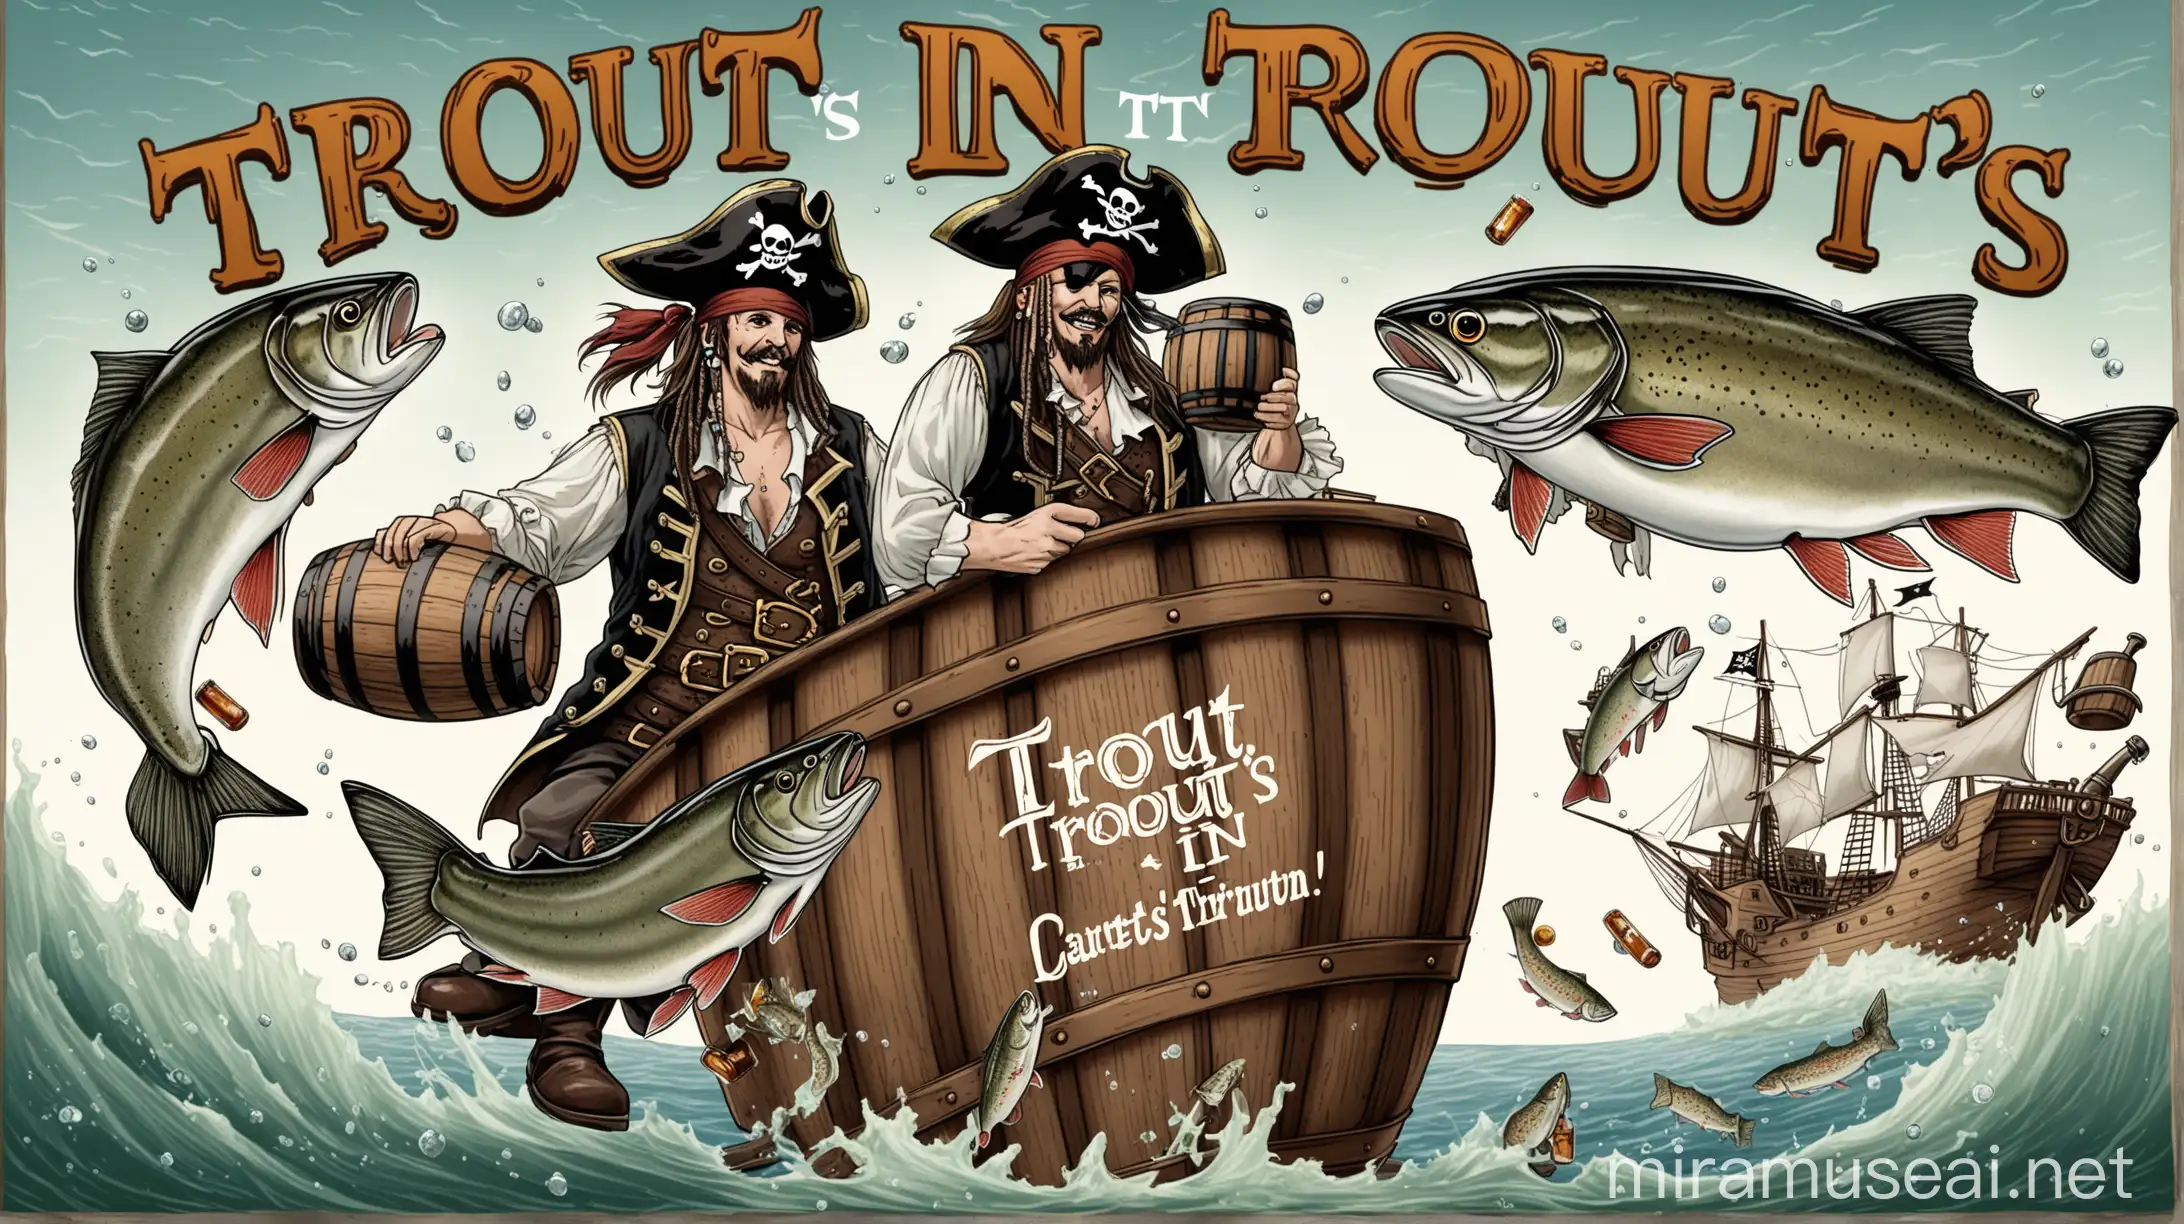 Pirate Holding Bourbon on Sinking Ship Amidst Flying Trout